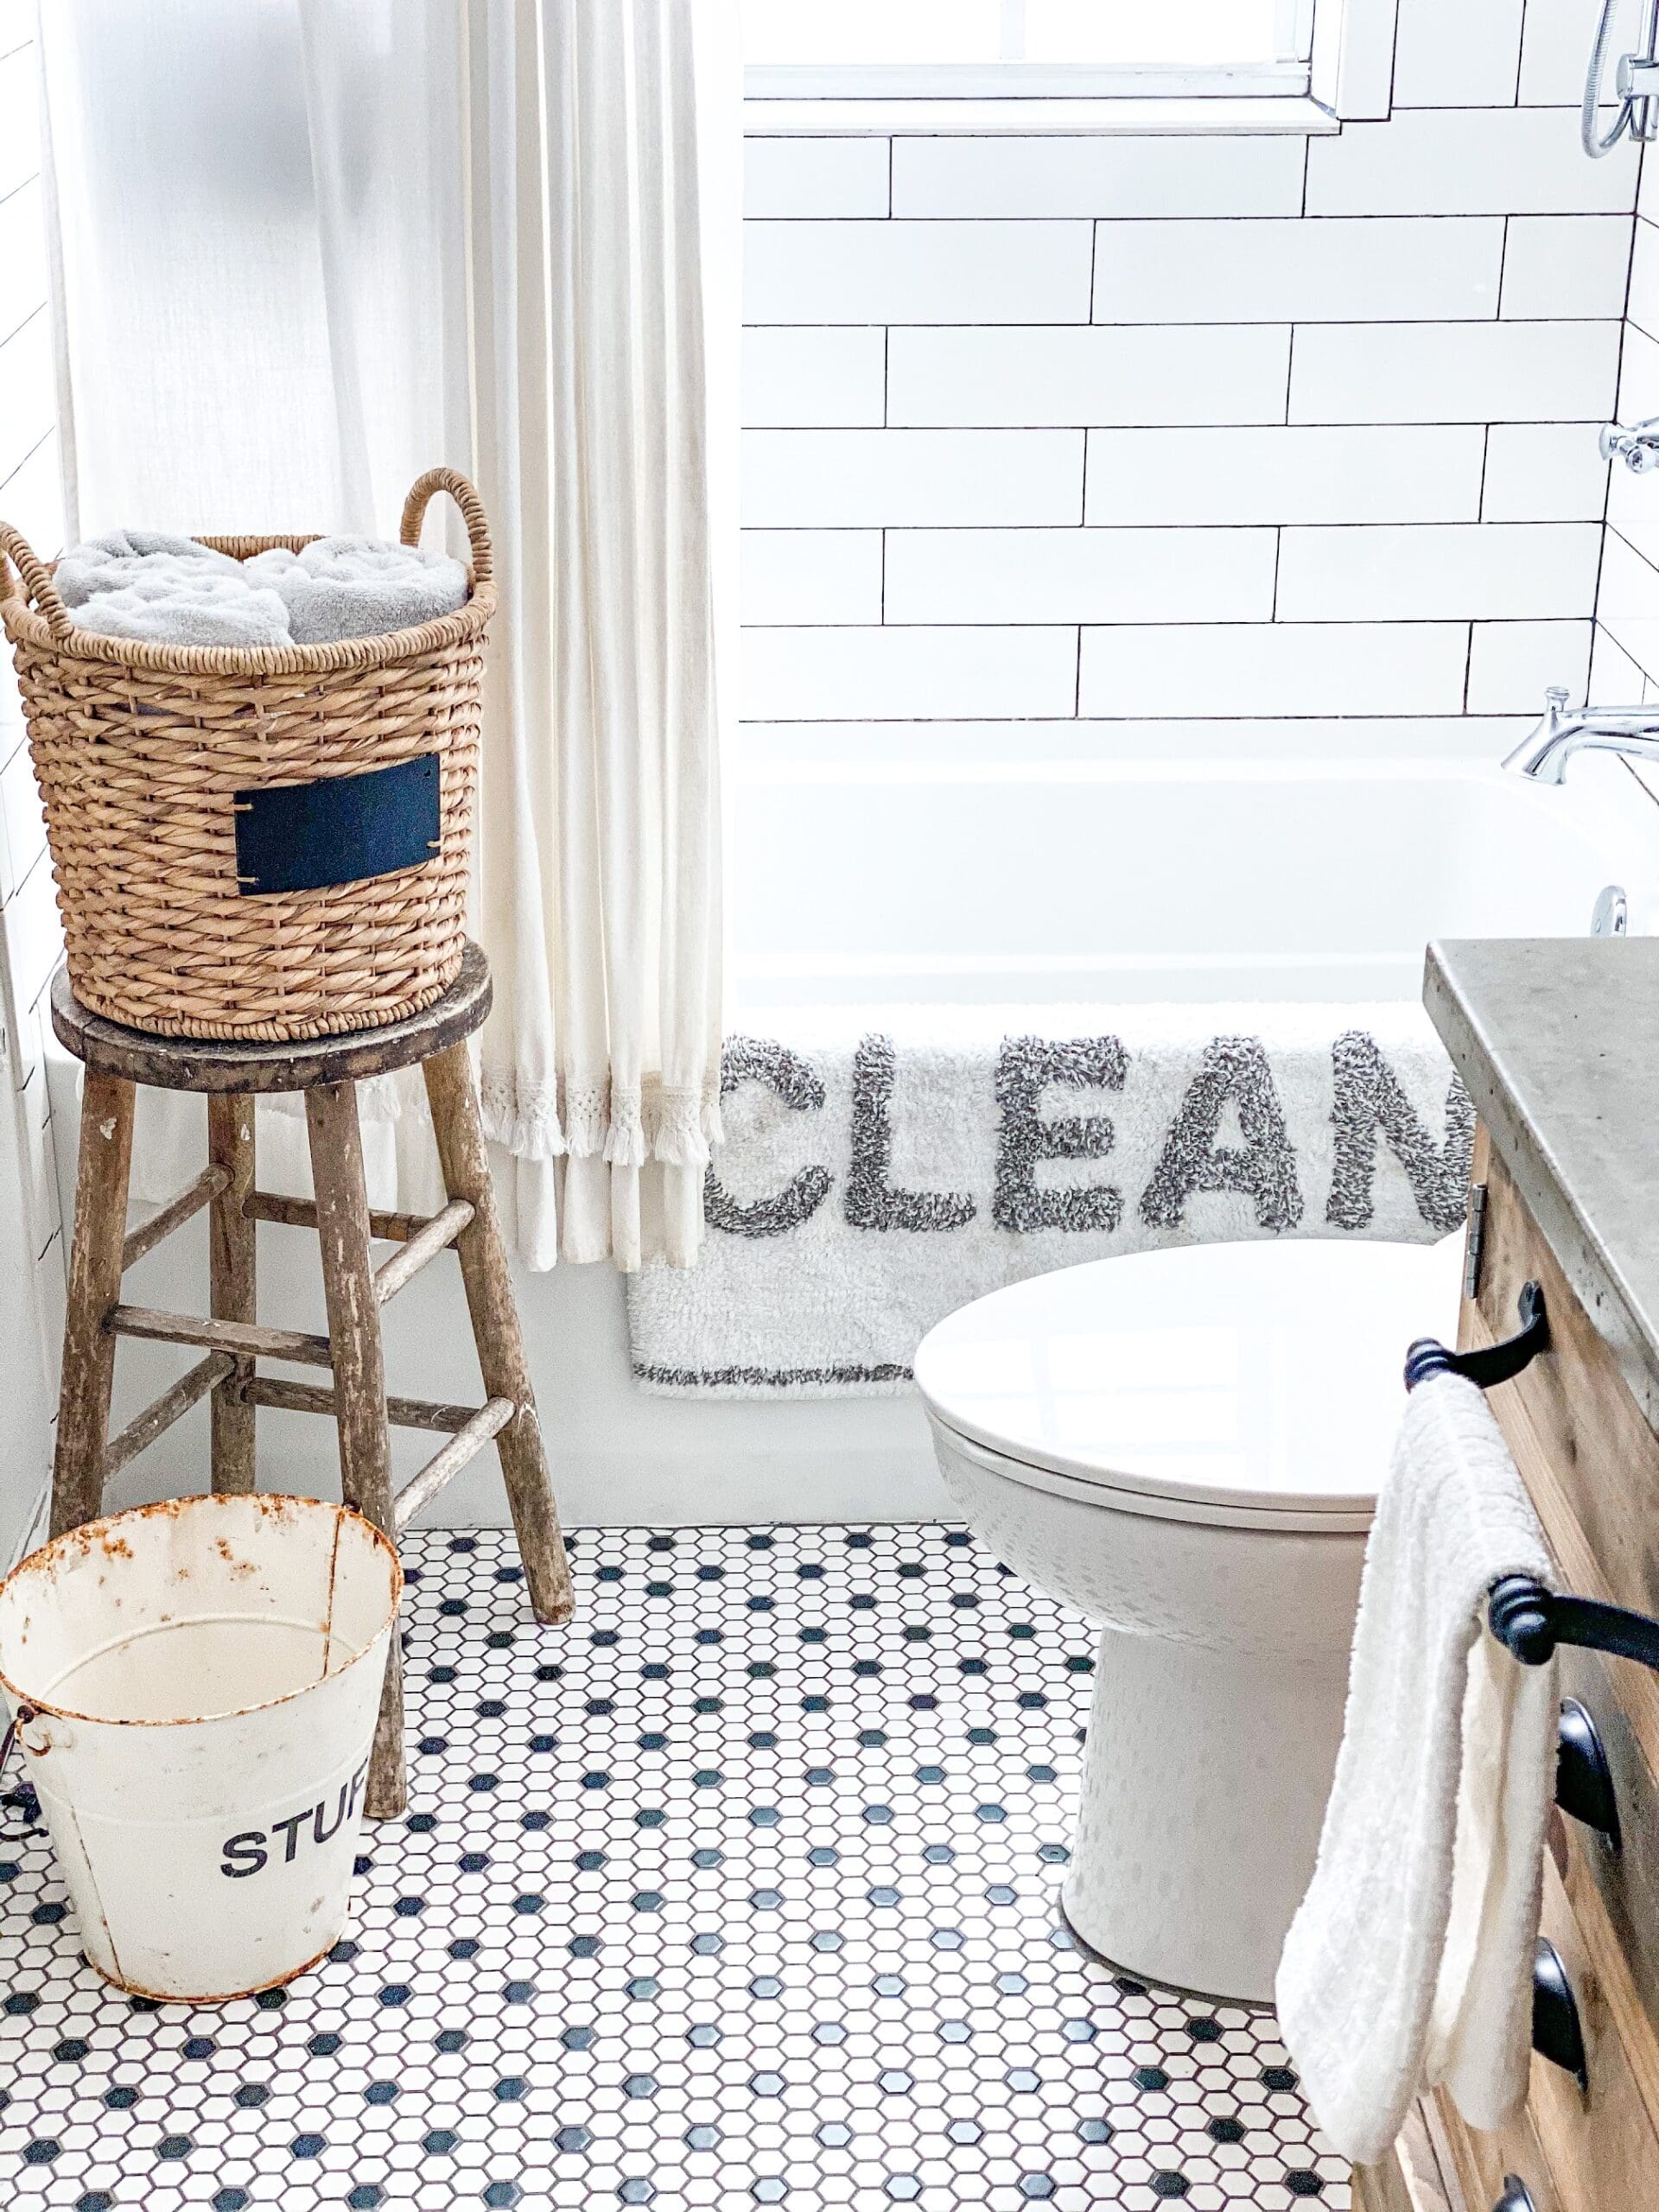 Showing the white shower curtain with white bathmat & gray "CLEAN" letters hung neatly over bathtub. A wicker basket of towels sits on a vintage wooden stool besides the tub.